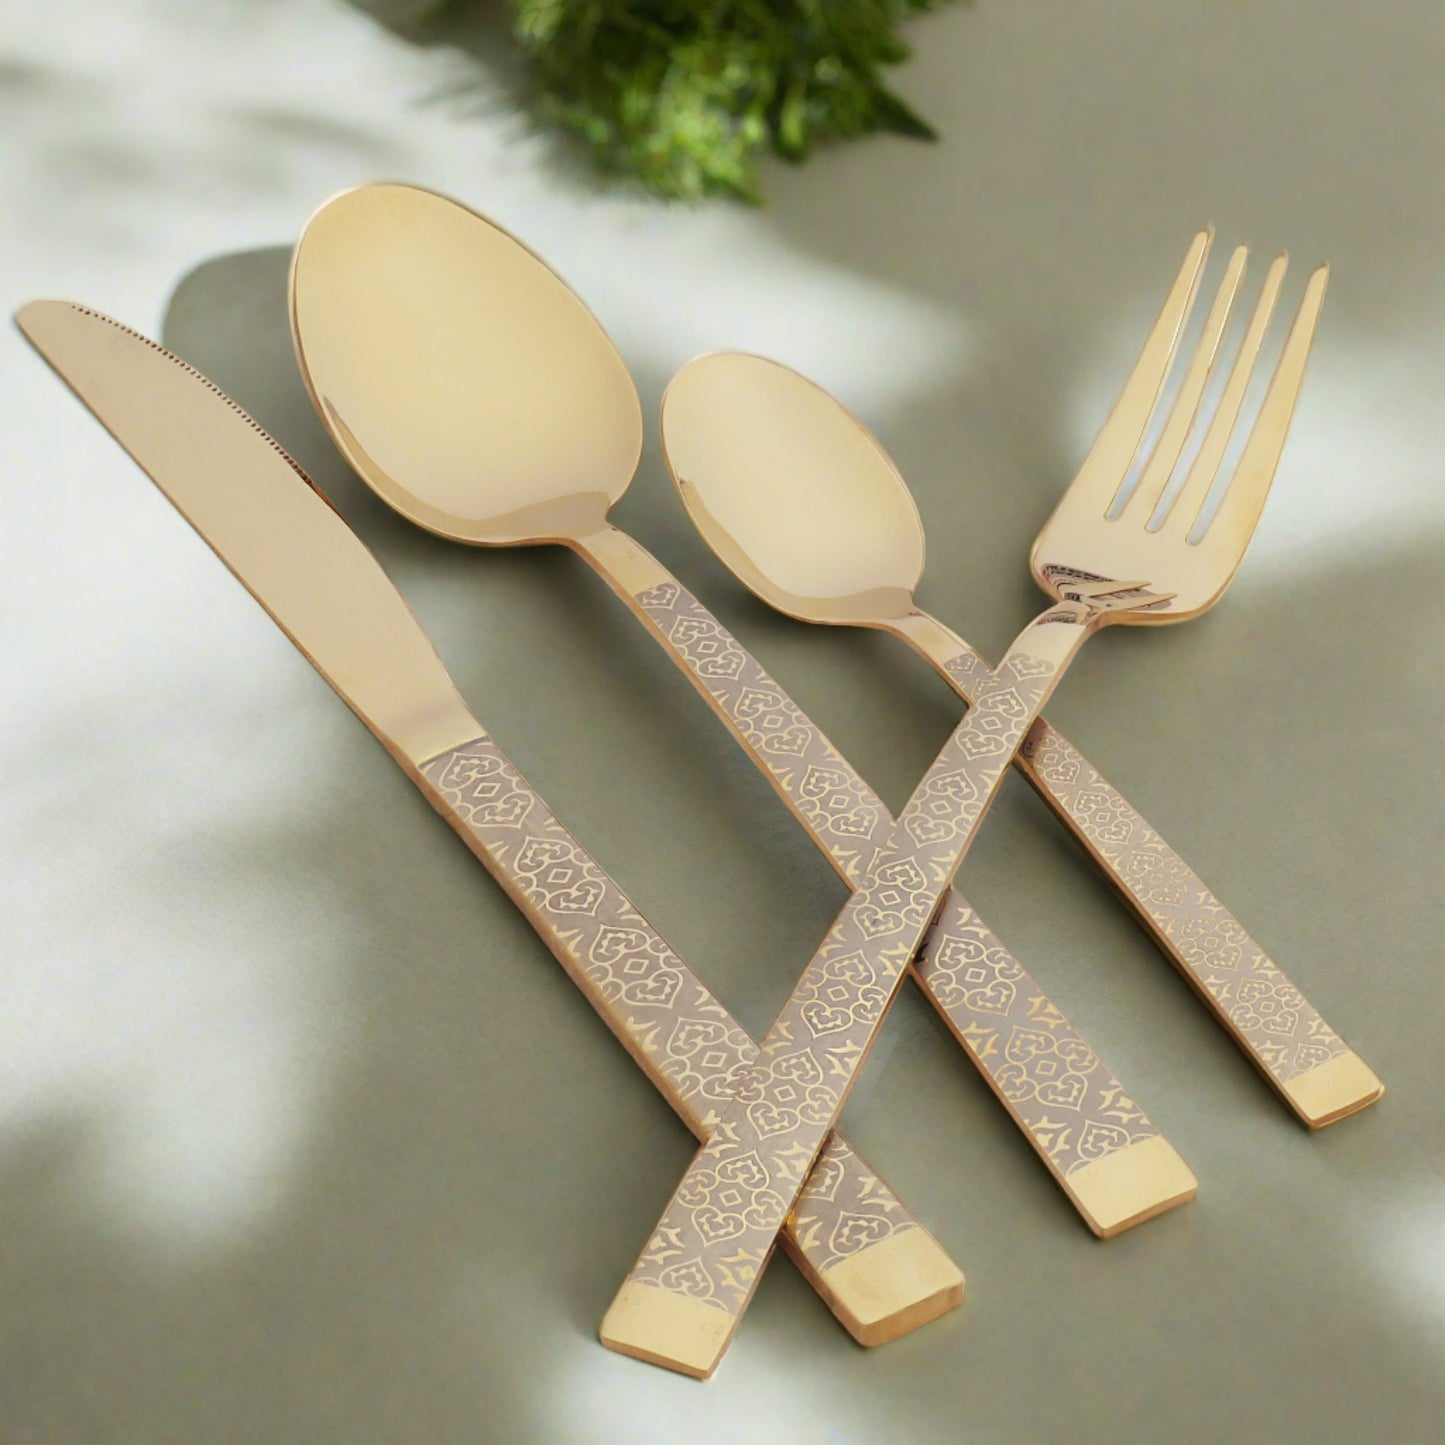 Elegant cutlery set by Swasha - redefine dining with timeless style